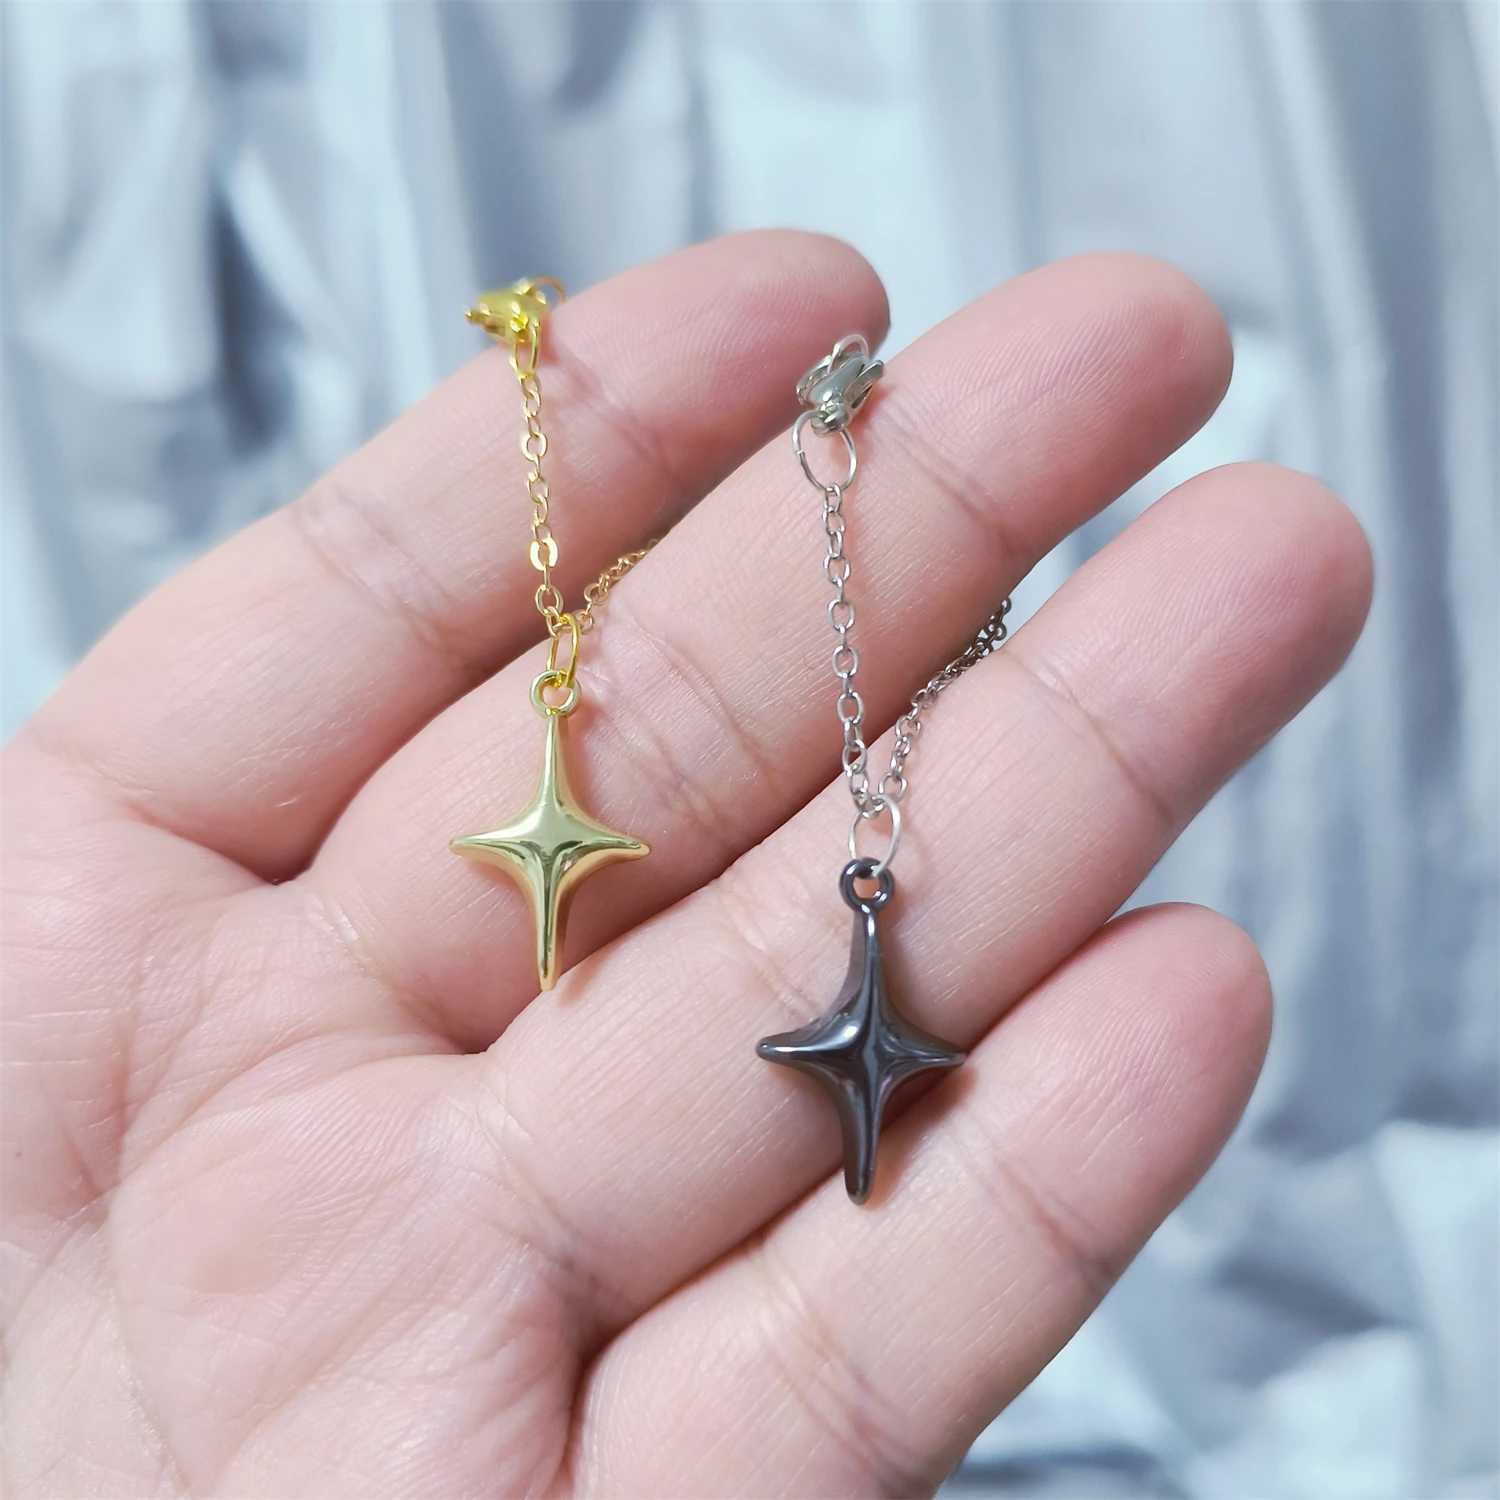 For BJD 1/6 Scale Blyth OB Doll Size Simulation Big Star Necklace Mini Tiny Accessories Decoration Alloy Prop Fashion